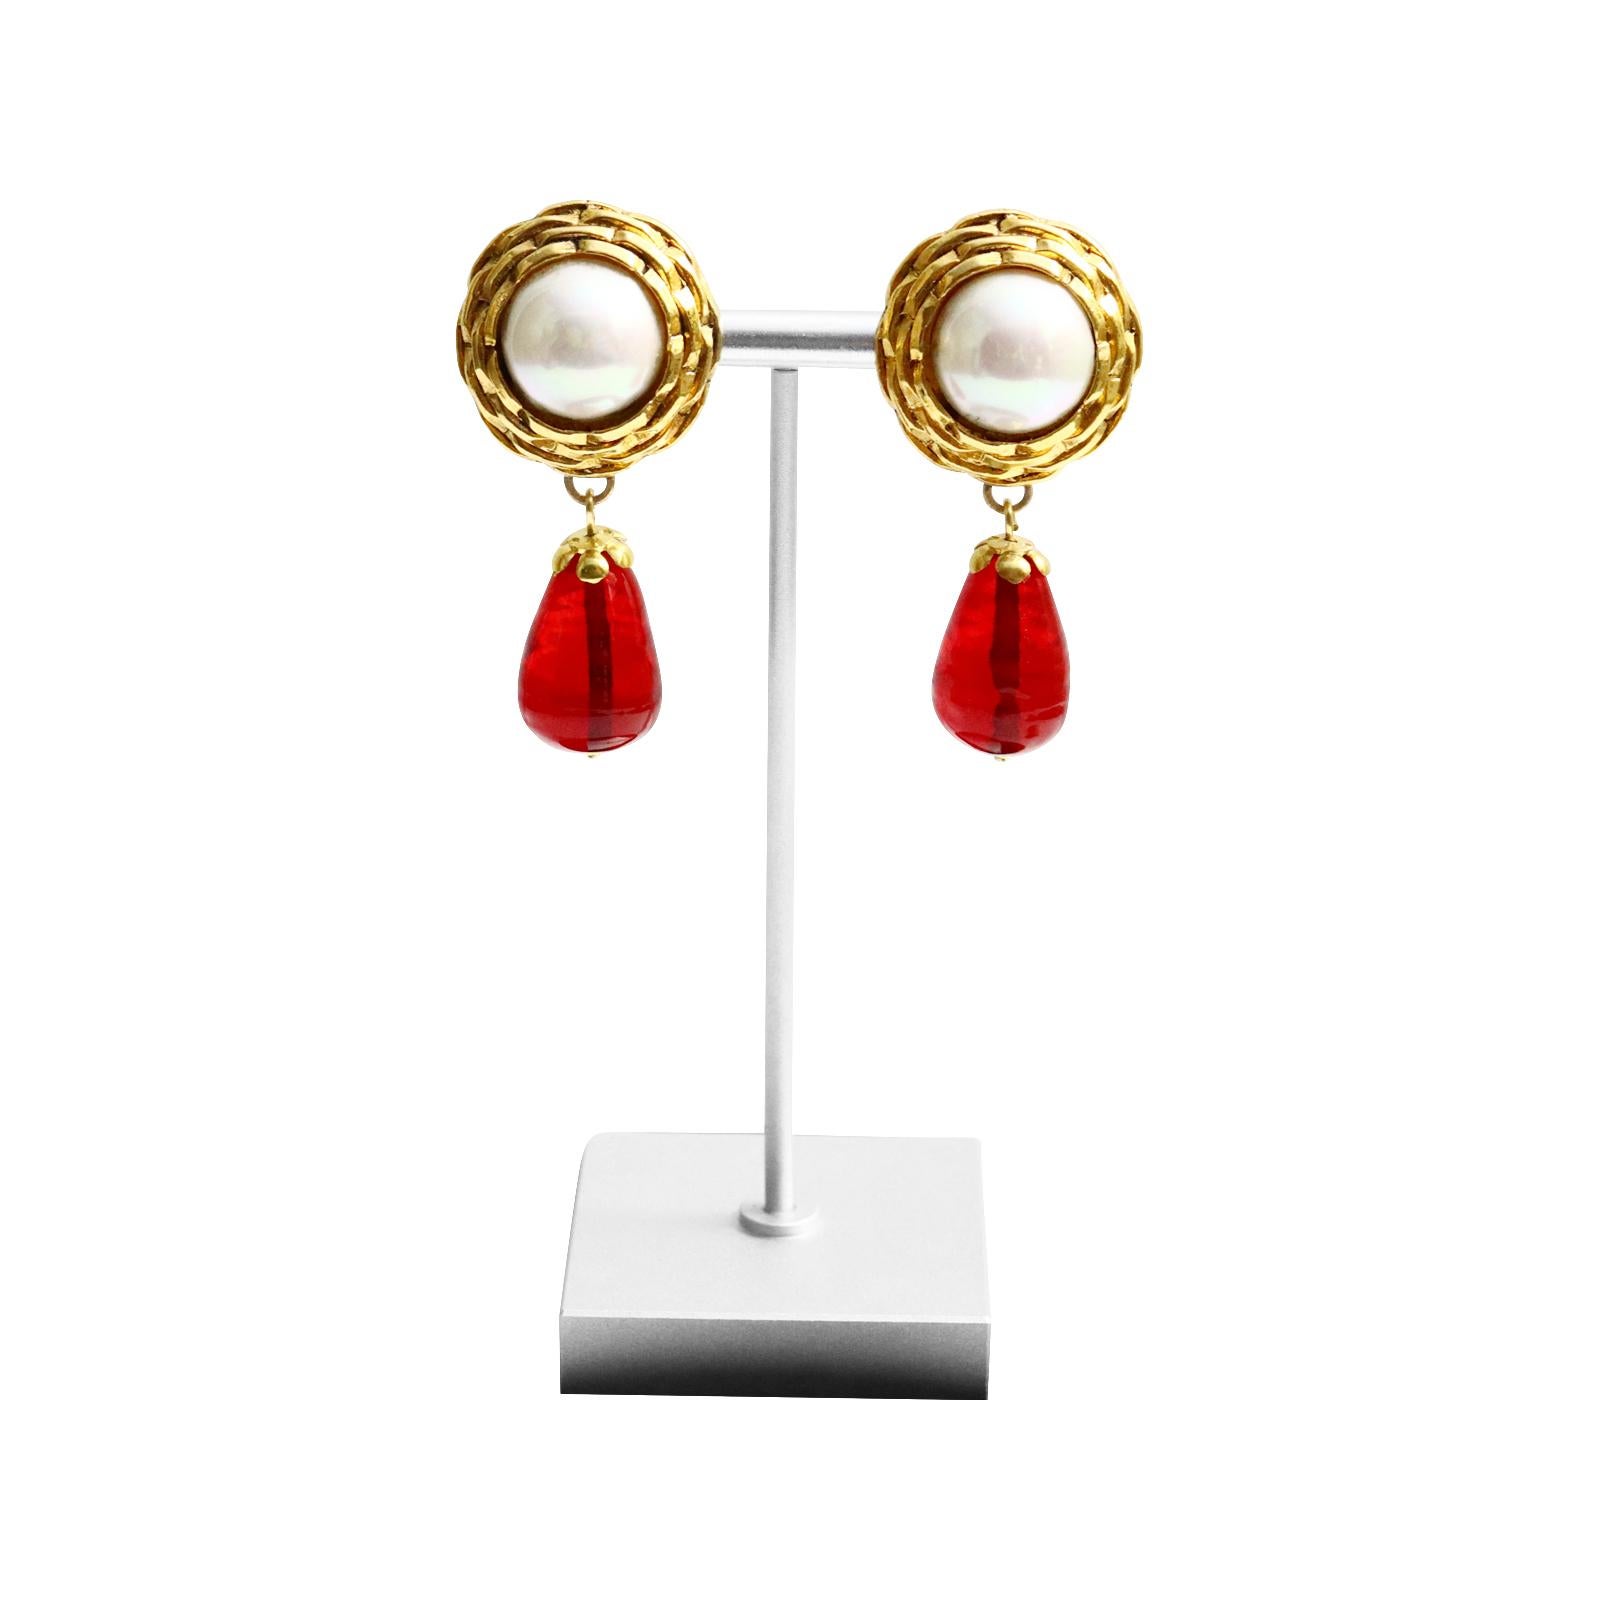 Modern Maison Gripoix Vintage Faux Pearl and Red Dangling Earrings Circa 1980s For Sale